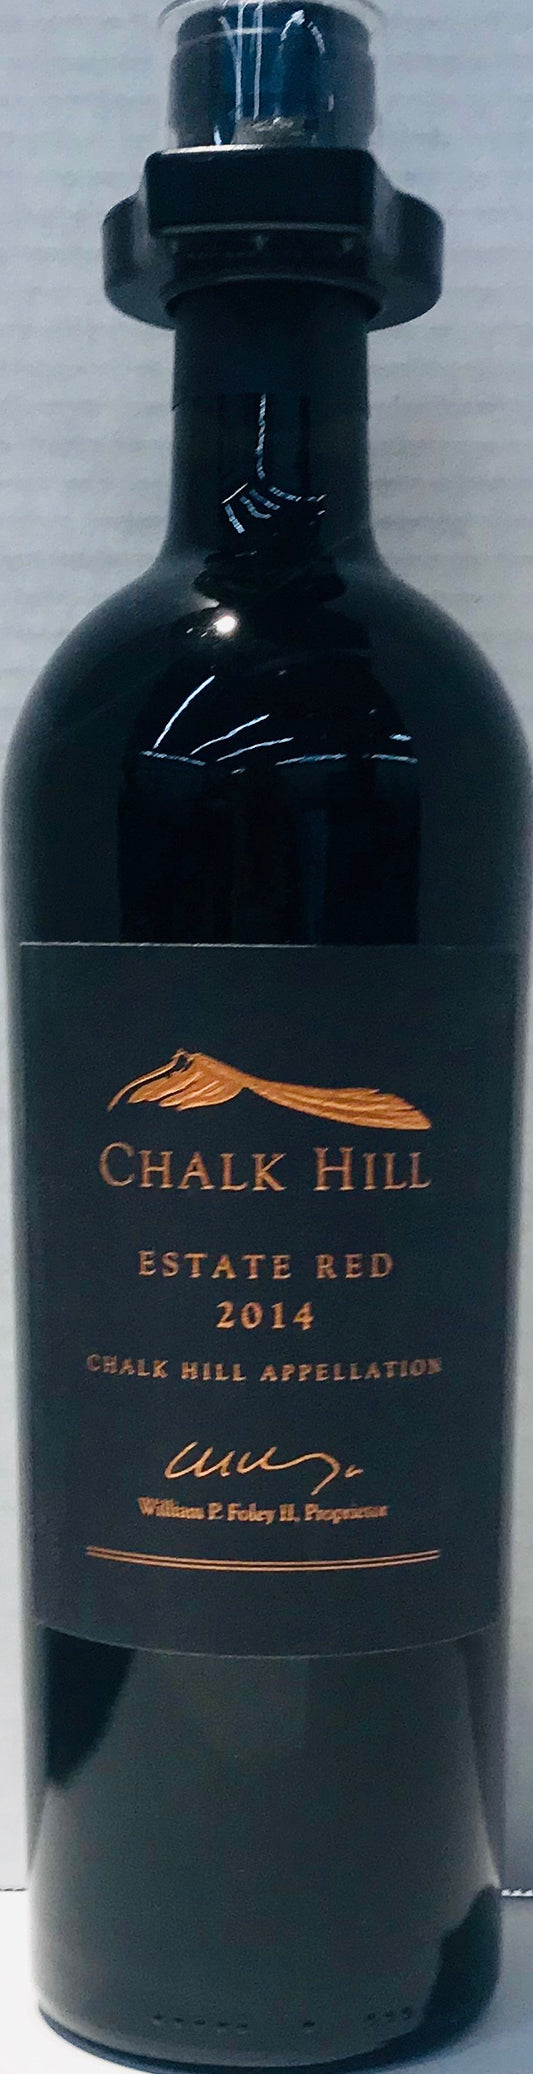 Chalk Hill Estate Red Bordeaux Blend - Wine from California